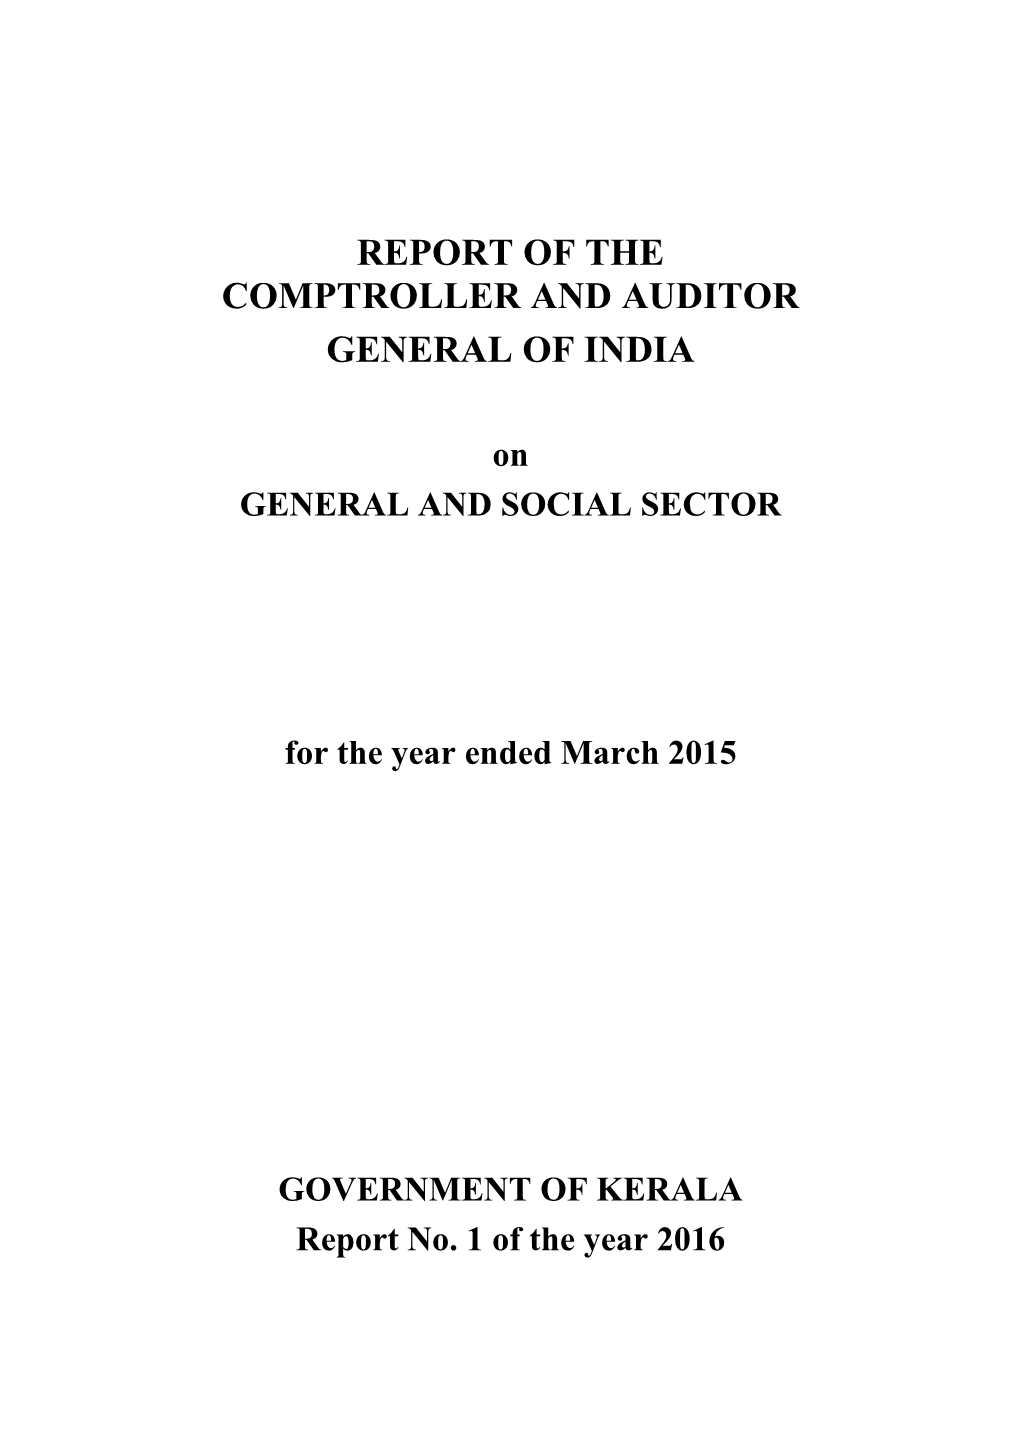 Report of the Comptroller and Auditor General of India